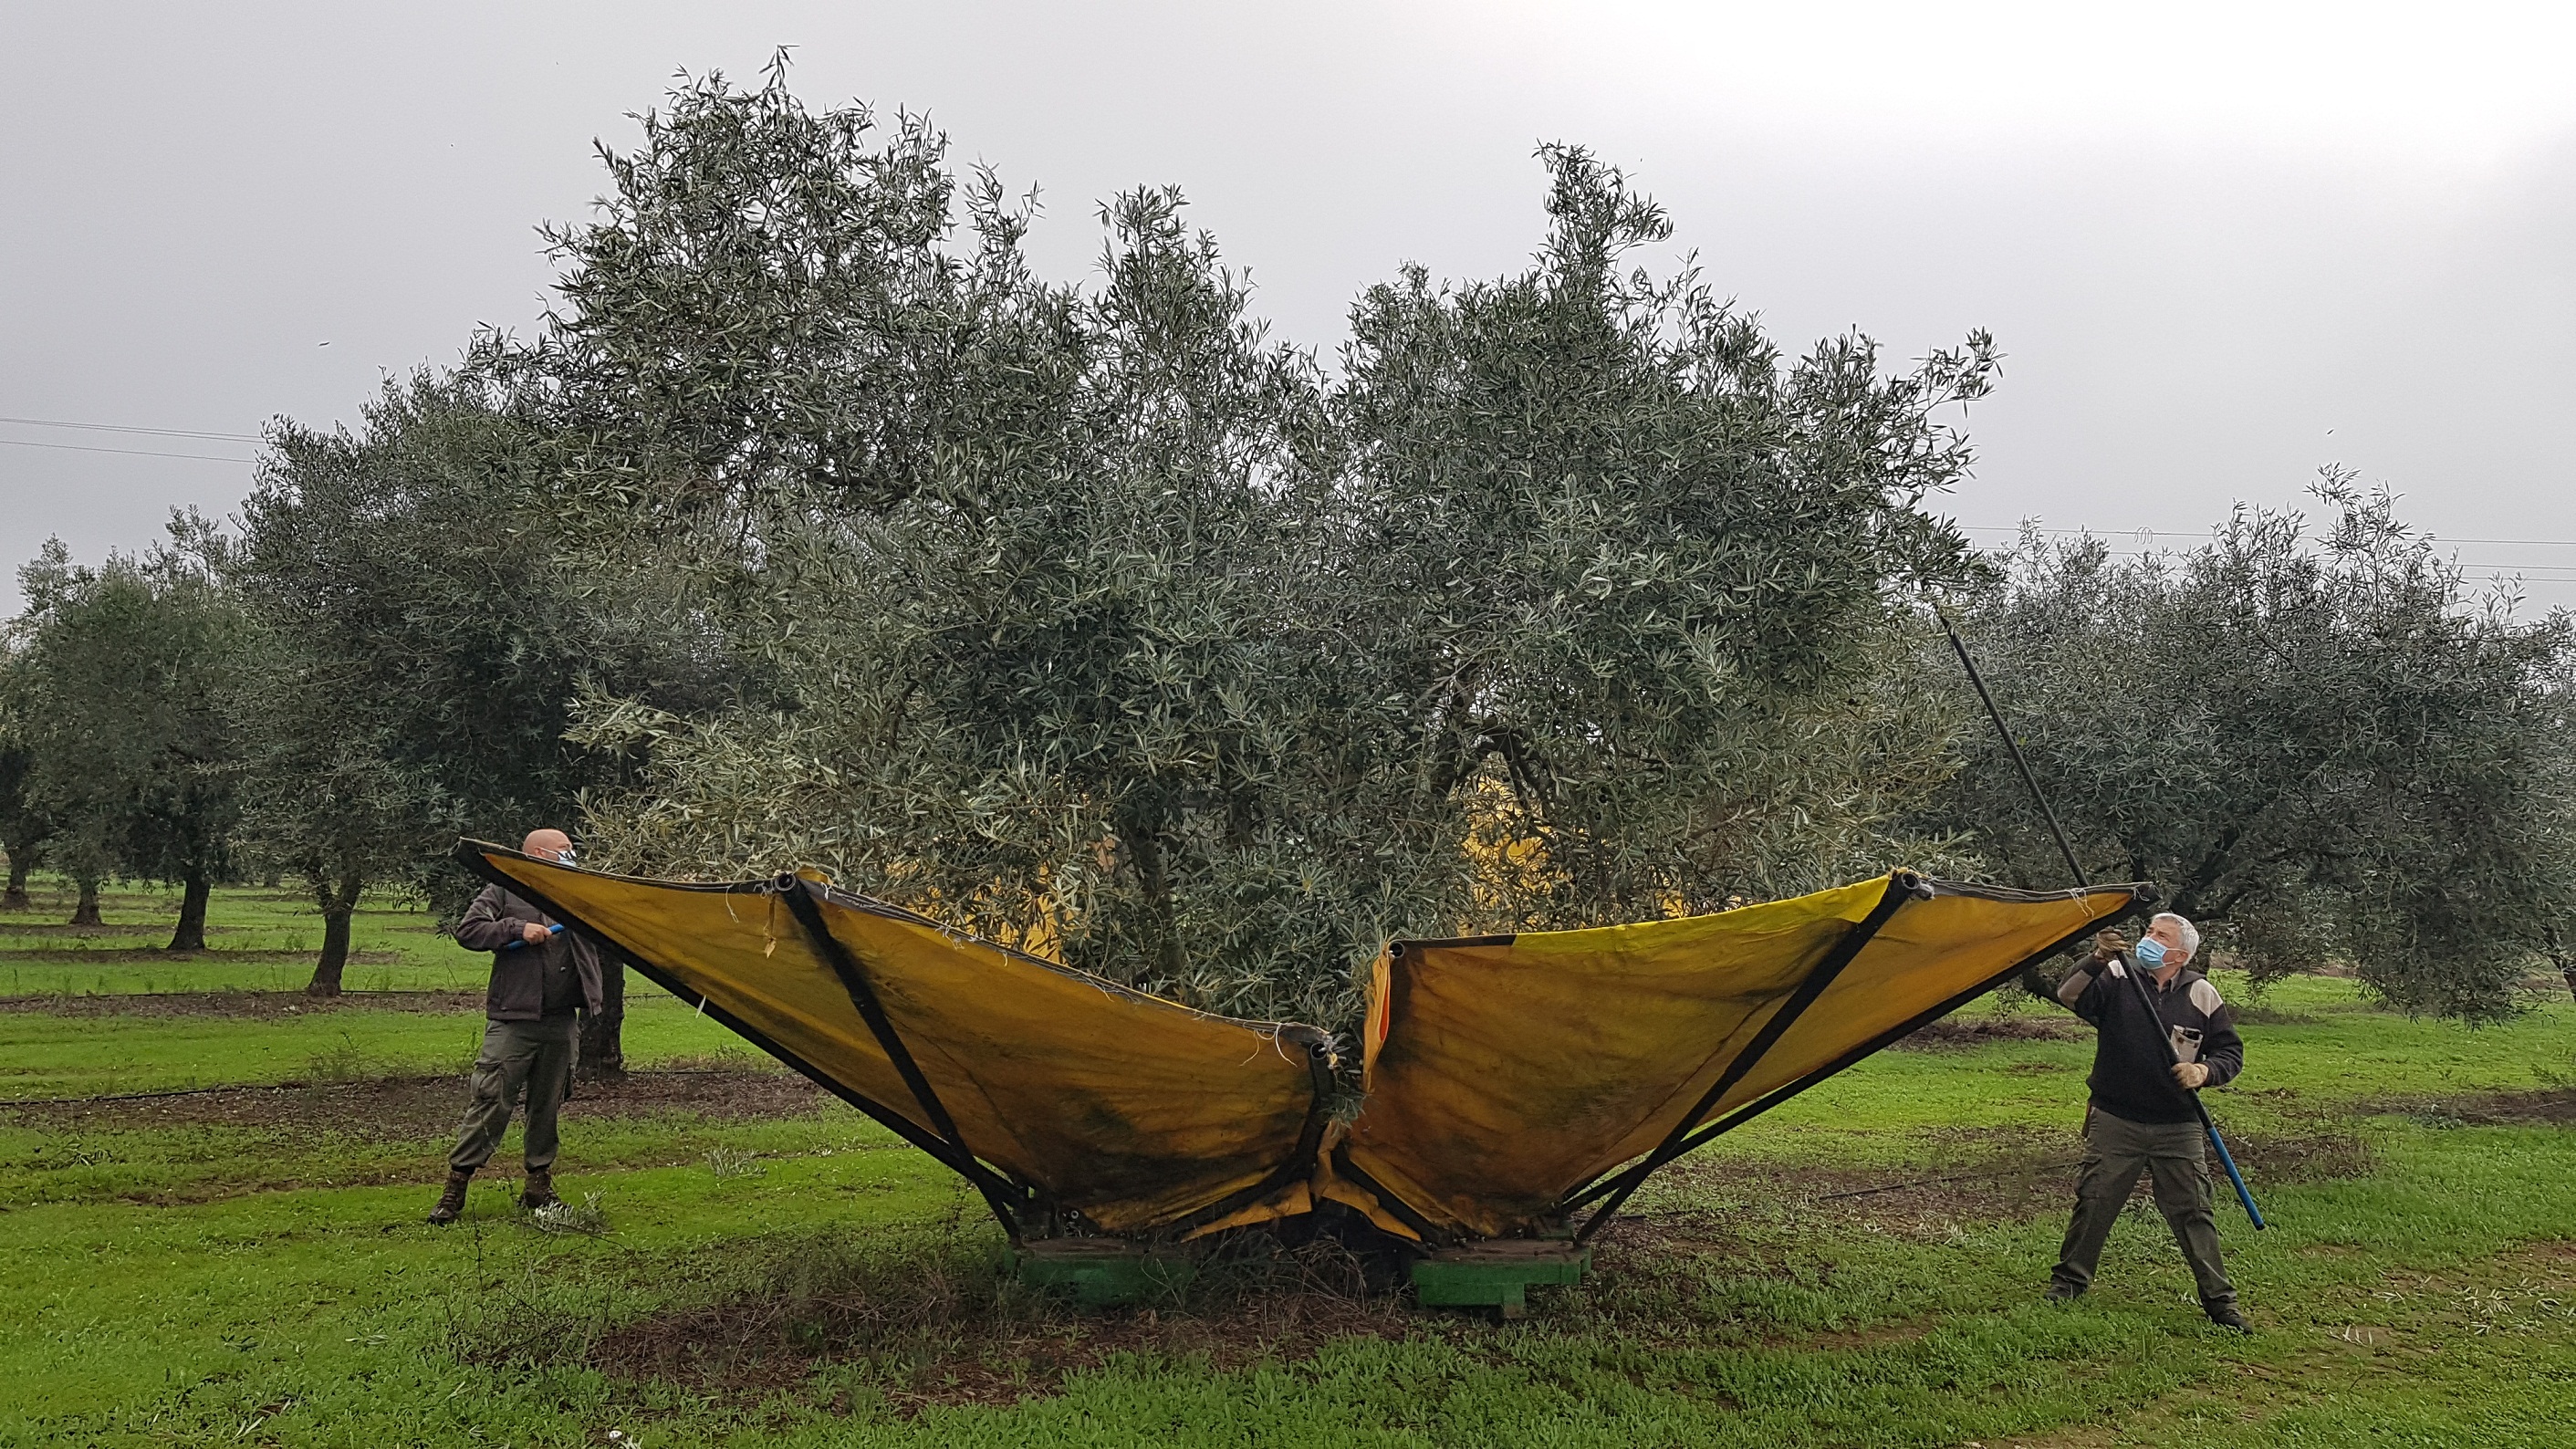 Mechanized harvesting with an umbrella vibrator in intensive olive groves